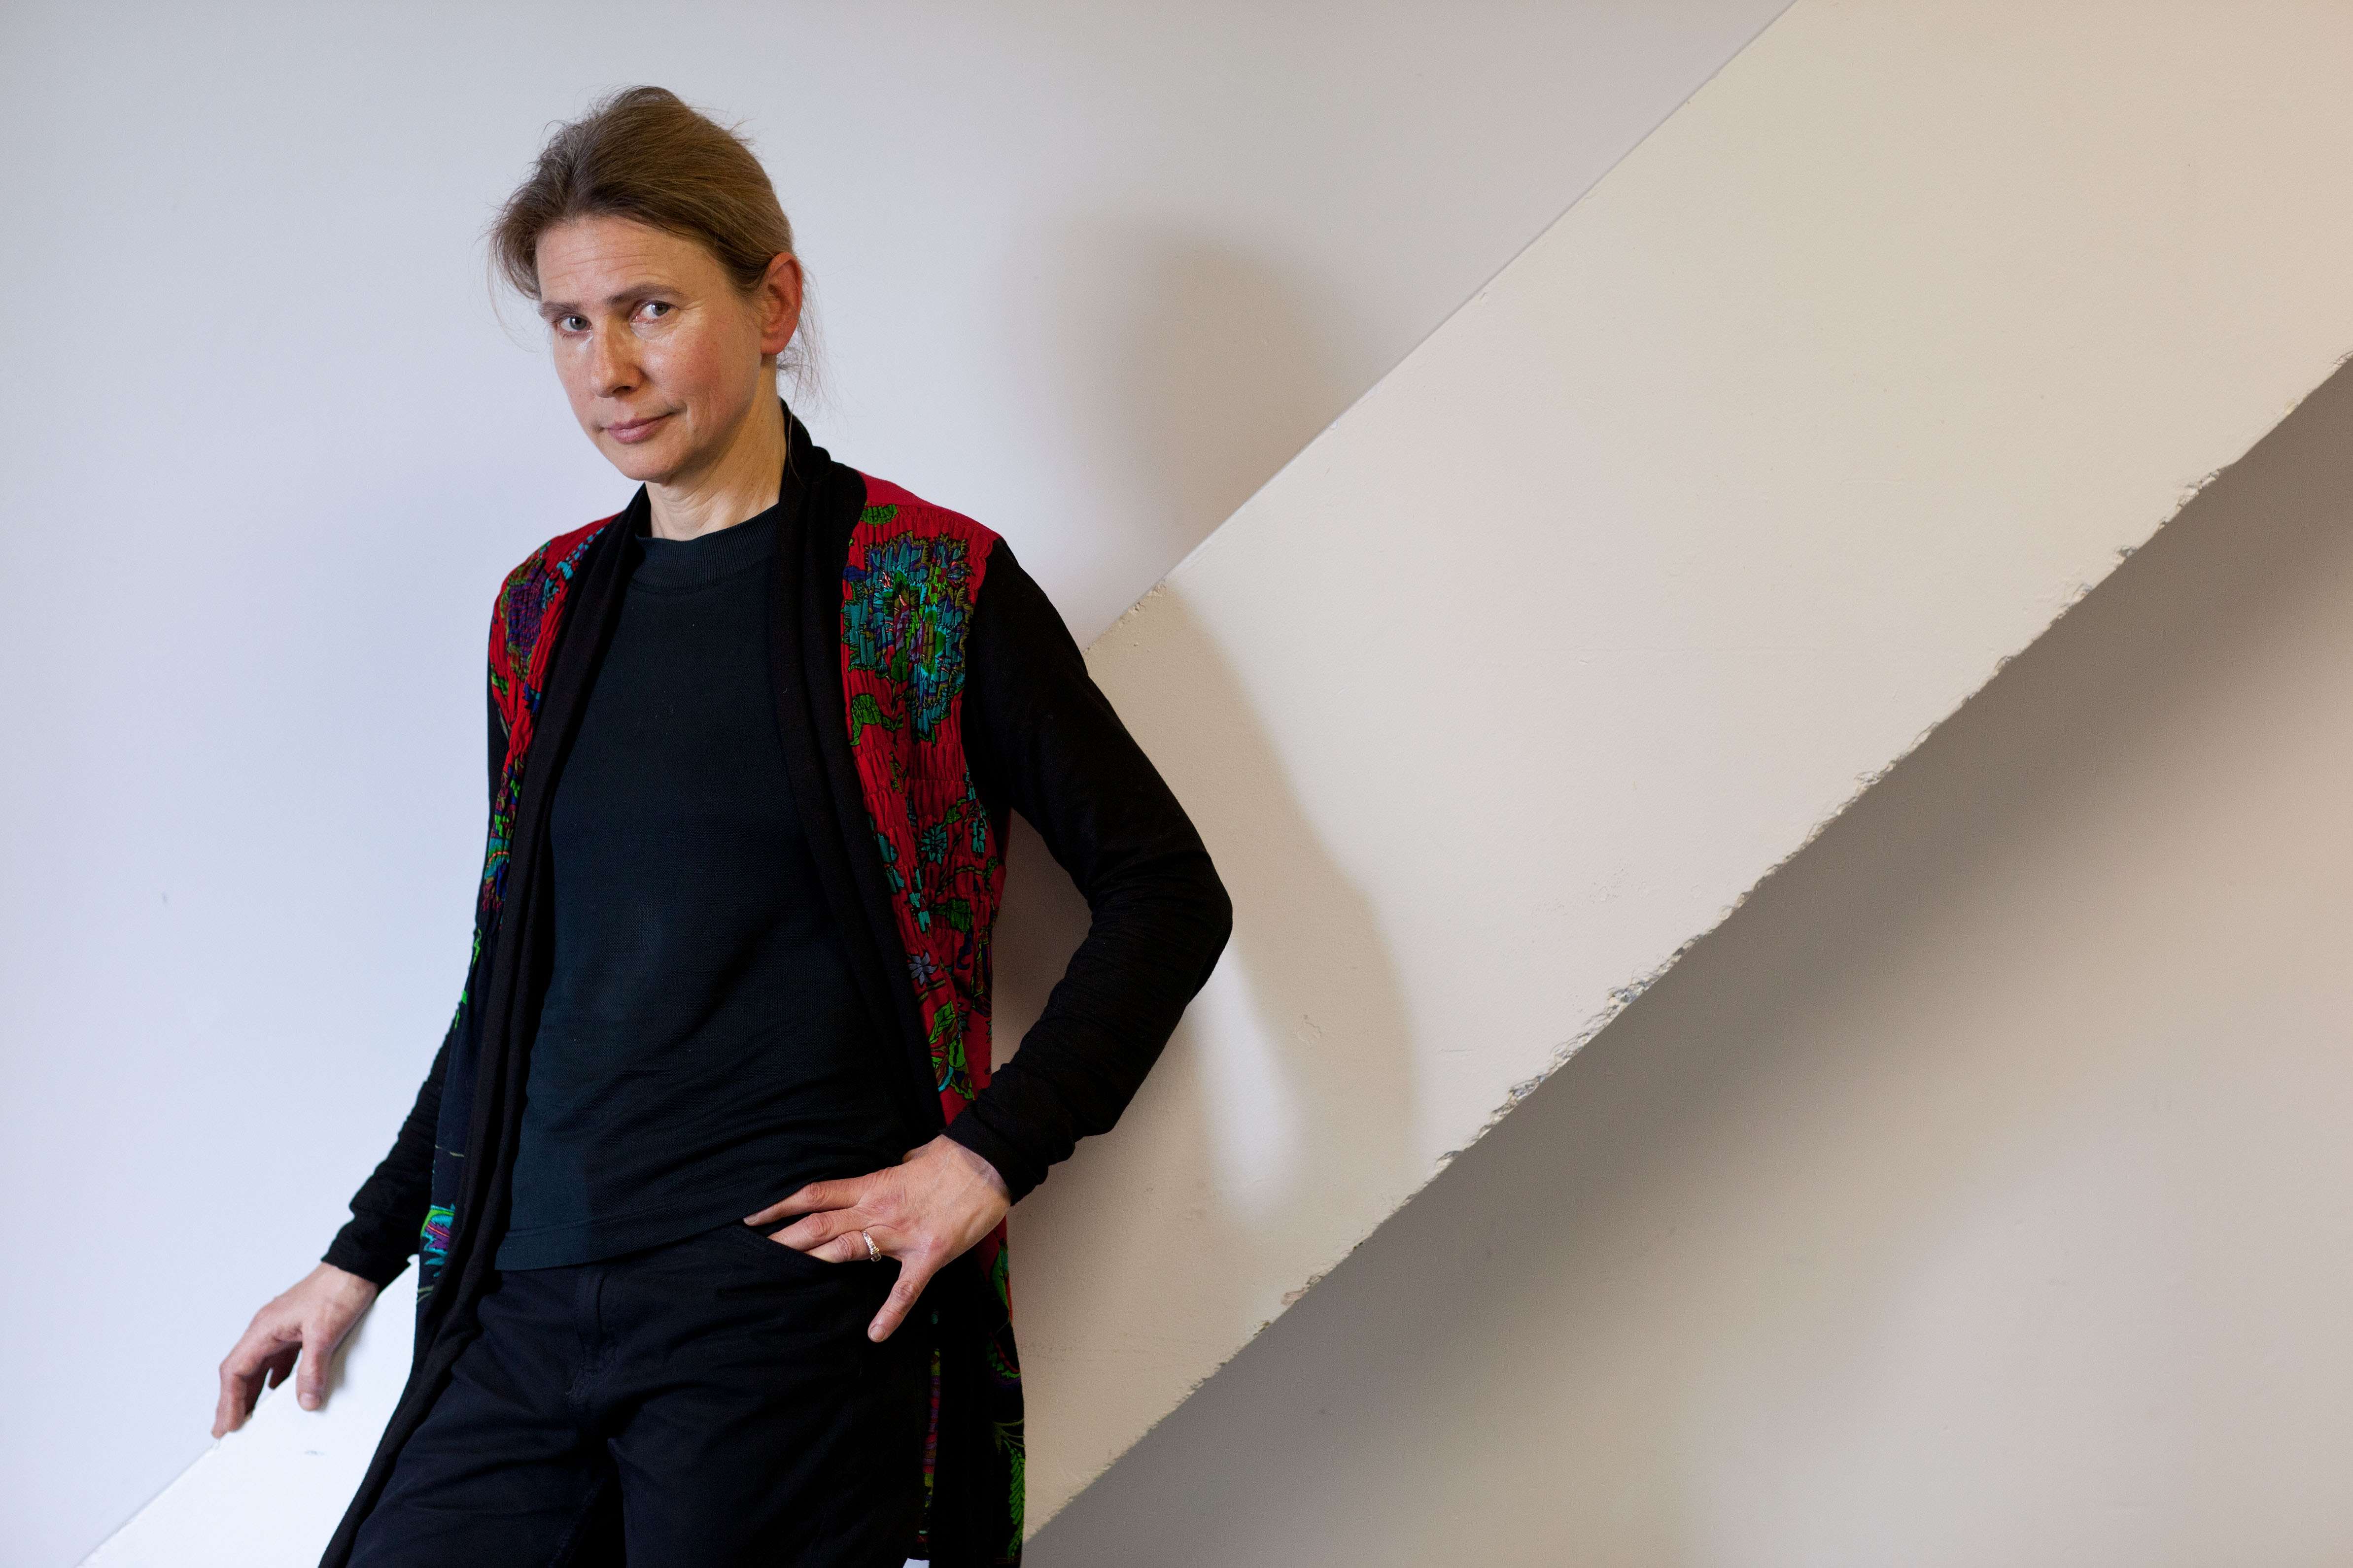 Author Lionel Shriver at the London Book Fair on April 15, 2013. (David Levenson&mdash;Getty Images)